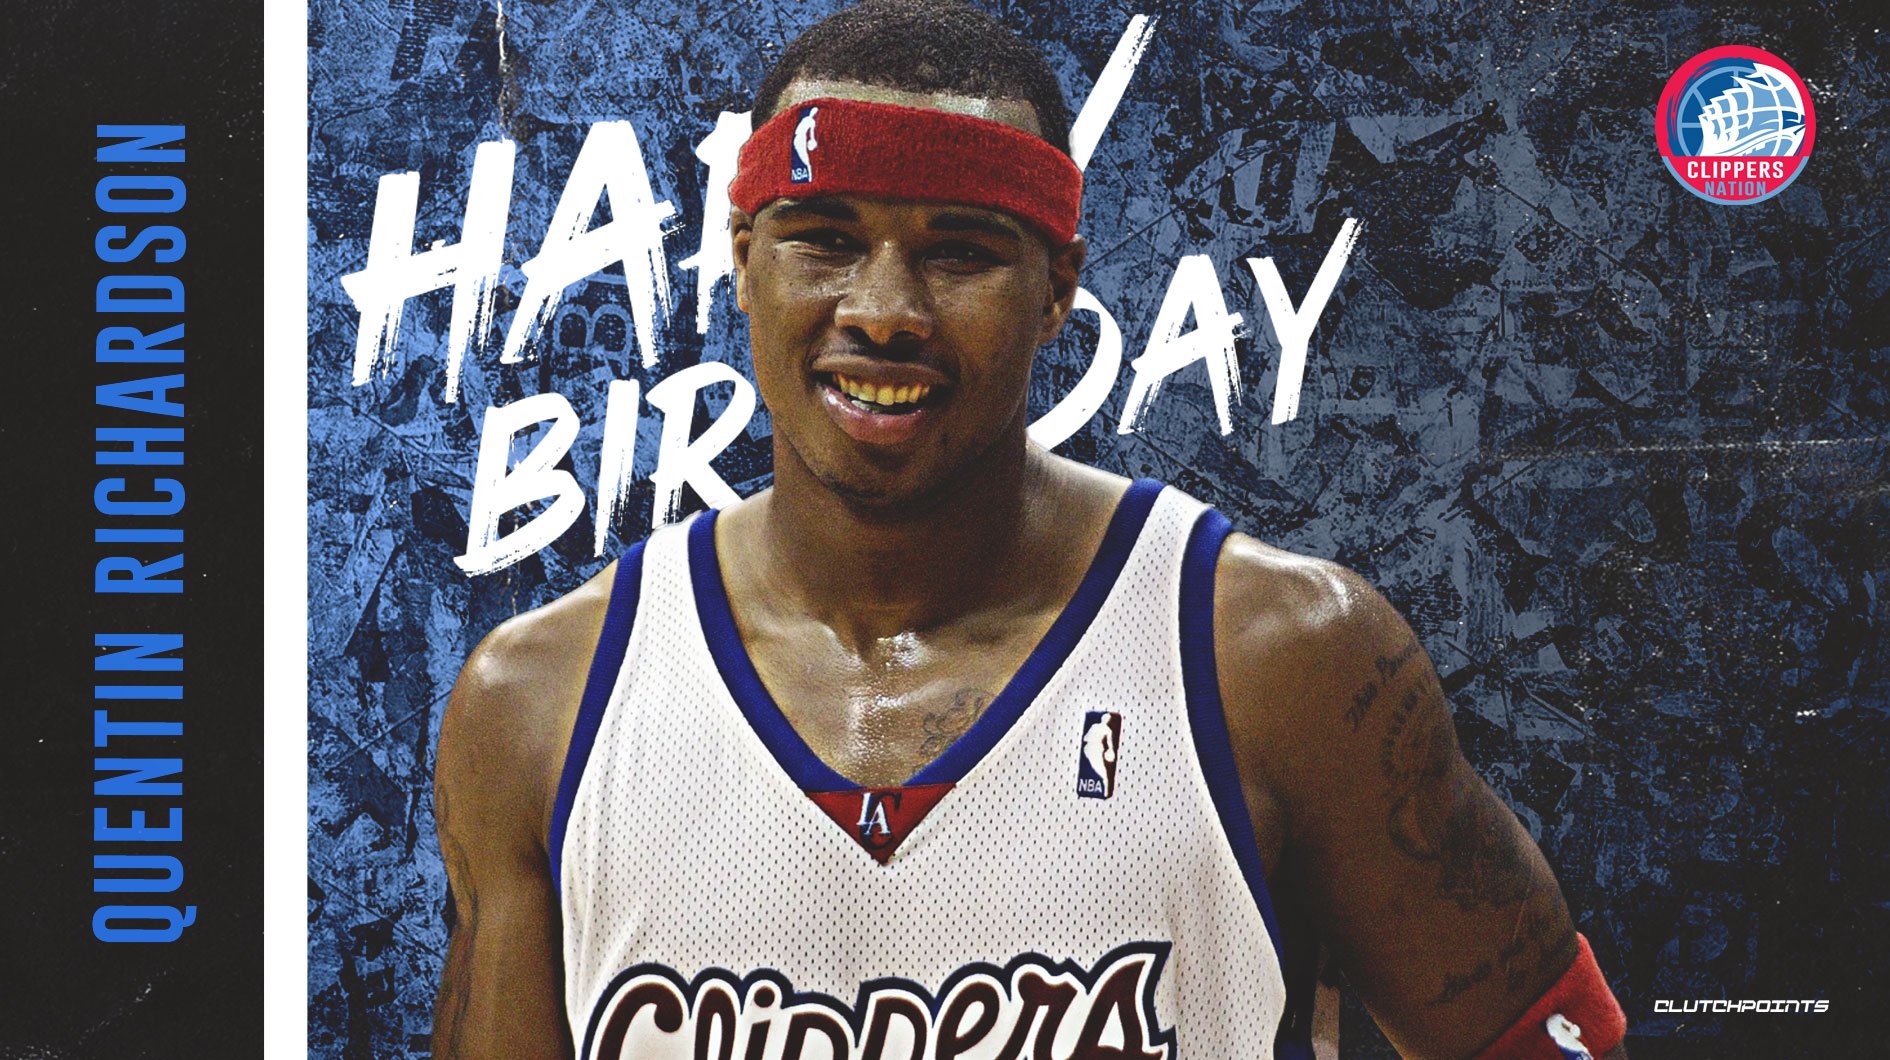 Join Clippers Nation in wishing Quentin Richardson a happy 41st birthday!  